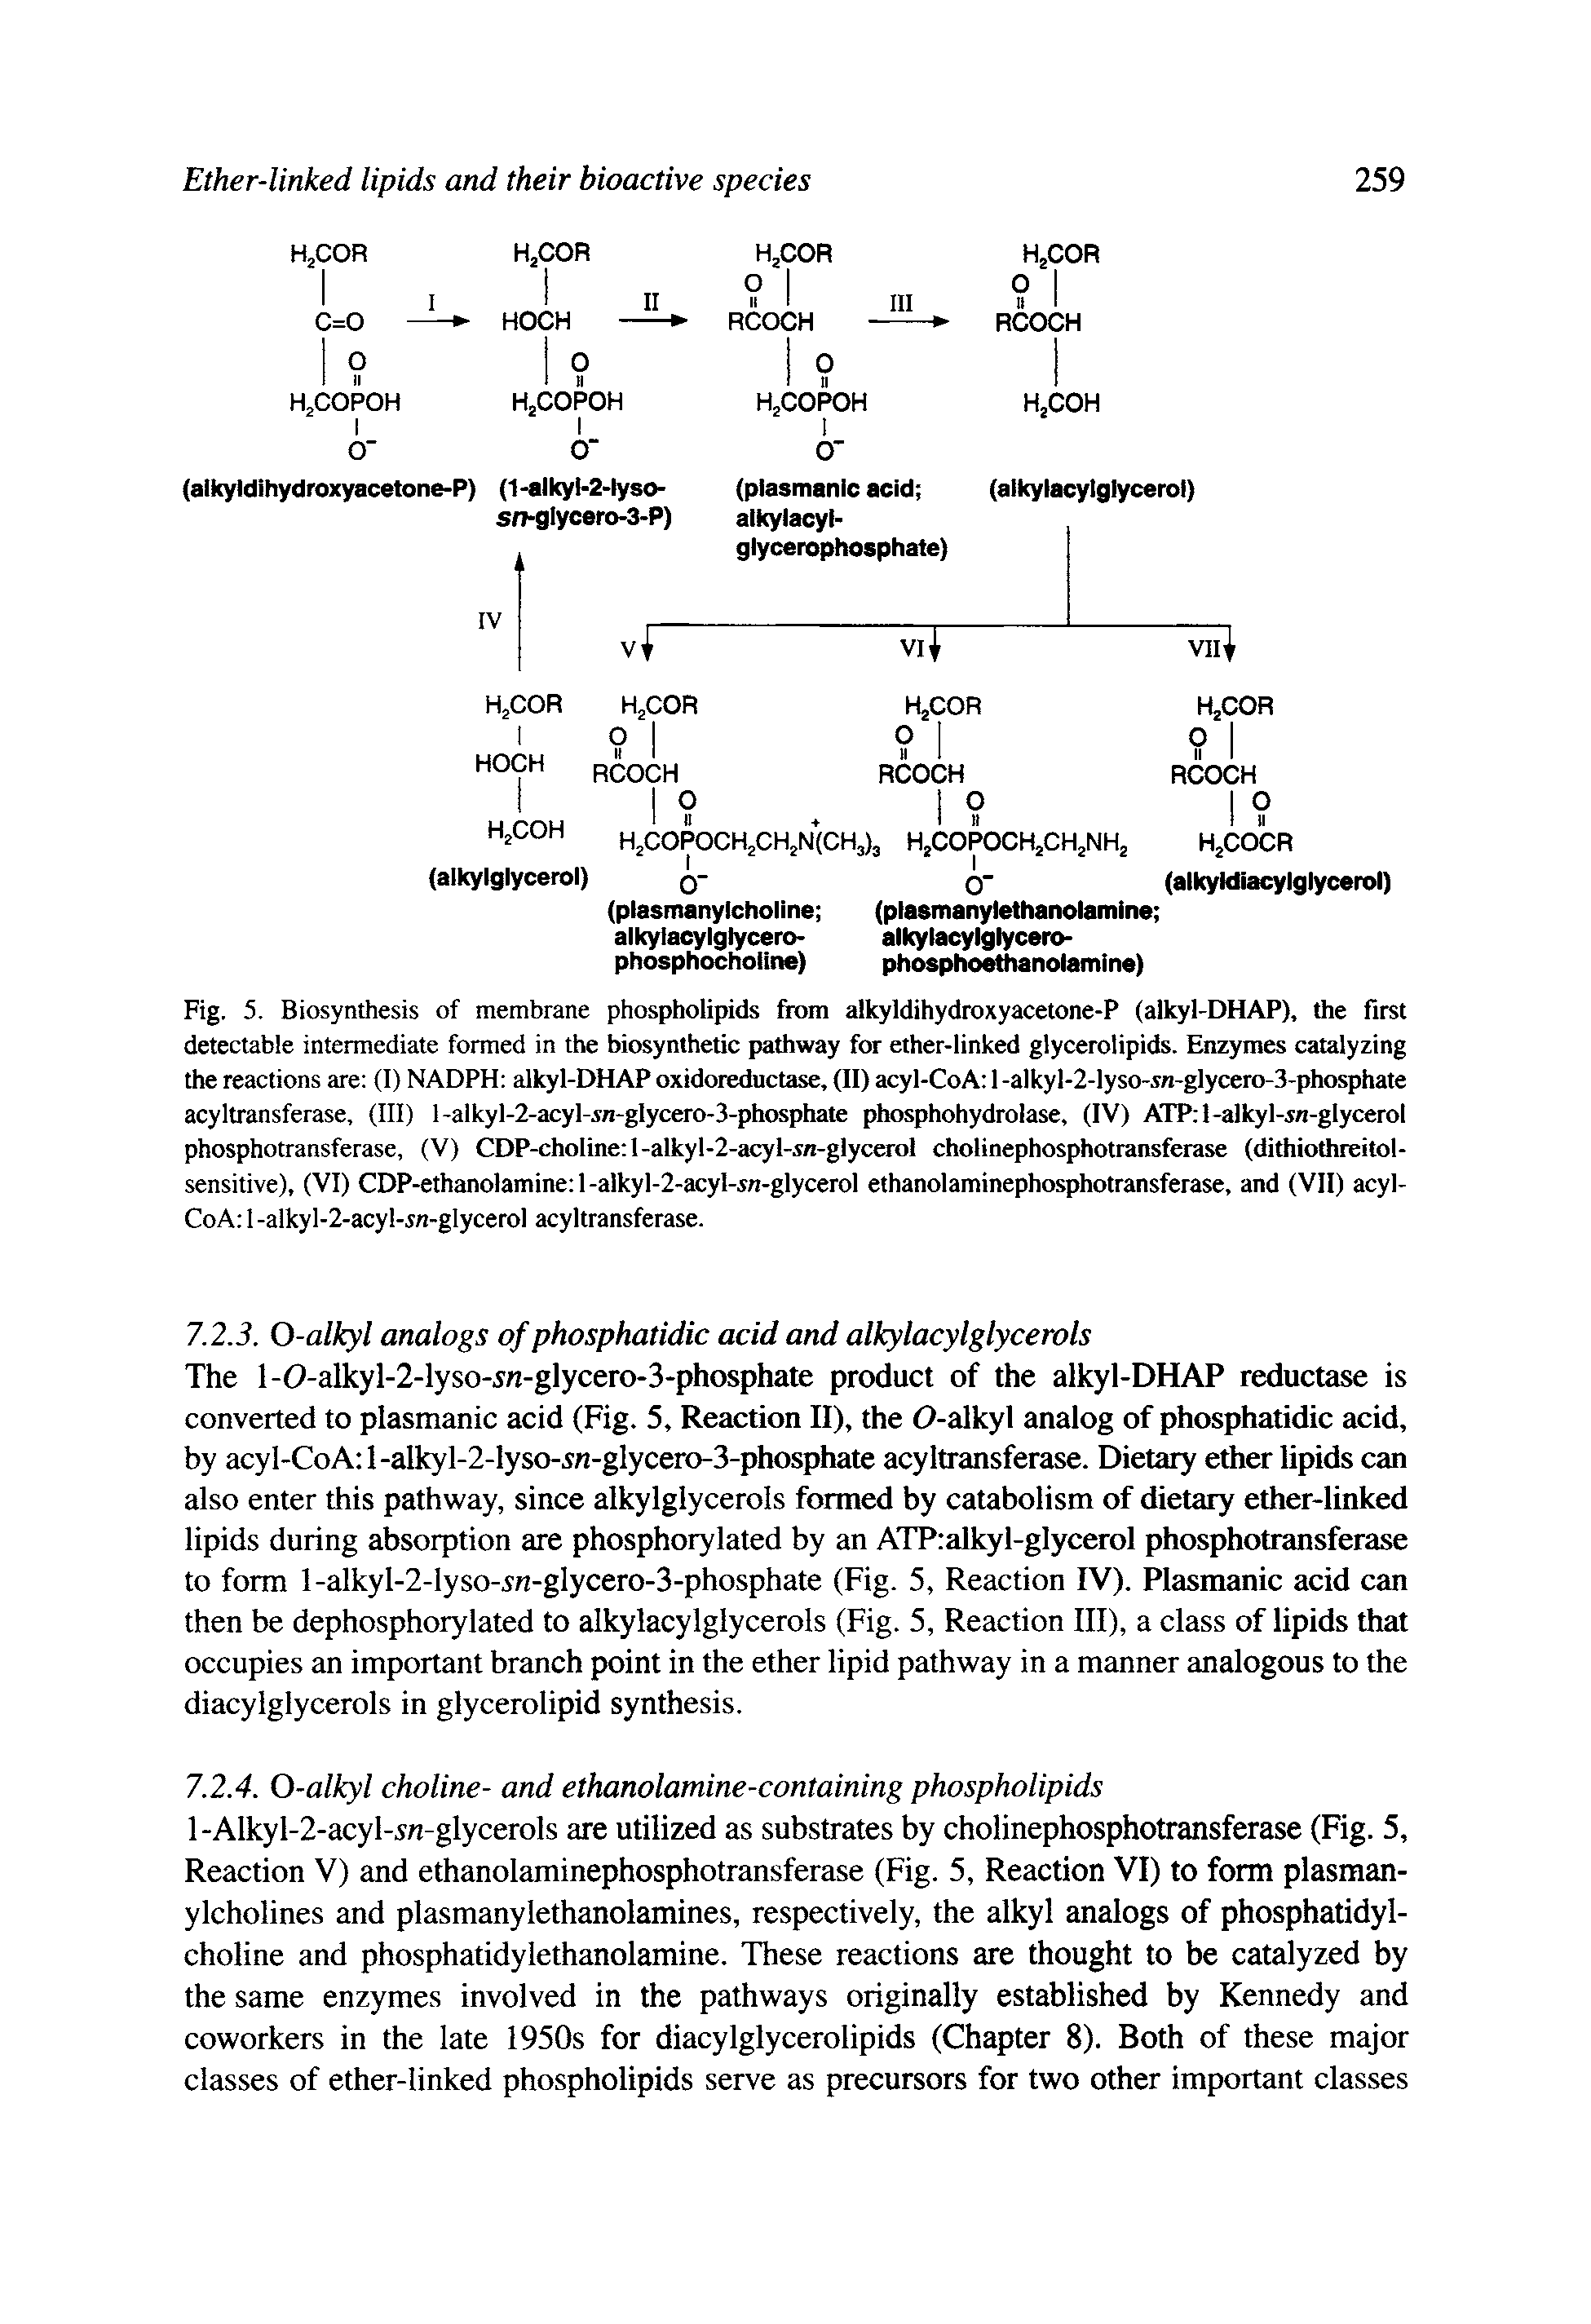 Fig. 5. Biosynthesis of membrane phospholipids from alkyldihydroxyacetone-P (alkyl-DHAP), the first detectable intermediate formed in the biosynthetic pathway for ether-linked glycerolipids. Enzymes catalyzing the reactions are (1) NADPH alkyl-DHAP oxidoreductase, (II) acyl-CoA 1 -alkyl-2-lyso-sn-glycero-3-phosphate acyltransferase, (III) l-alkyl-2-acyl-in-glycero-3-phosphate phosphohydrolase, (IV) ATP 1-alkyl- /i-glycerol phosphotransferase, (V) CDP-choline l-alkyl-2-acyl-sn-glycerol cholinephosphotransferase (dithiothreitol-sensitive), (VI) CDP-ethanolamine l-alkyl-2-acyI-sn-glycerol ethanolaminephosphotransferase, and (VII) acyl-CoA 1 -alkyl-2-acy 1-OT-glycerol acyltransferase.